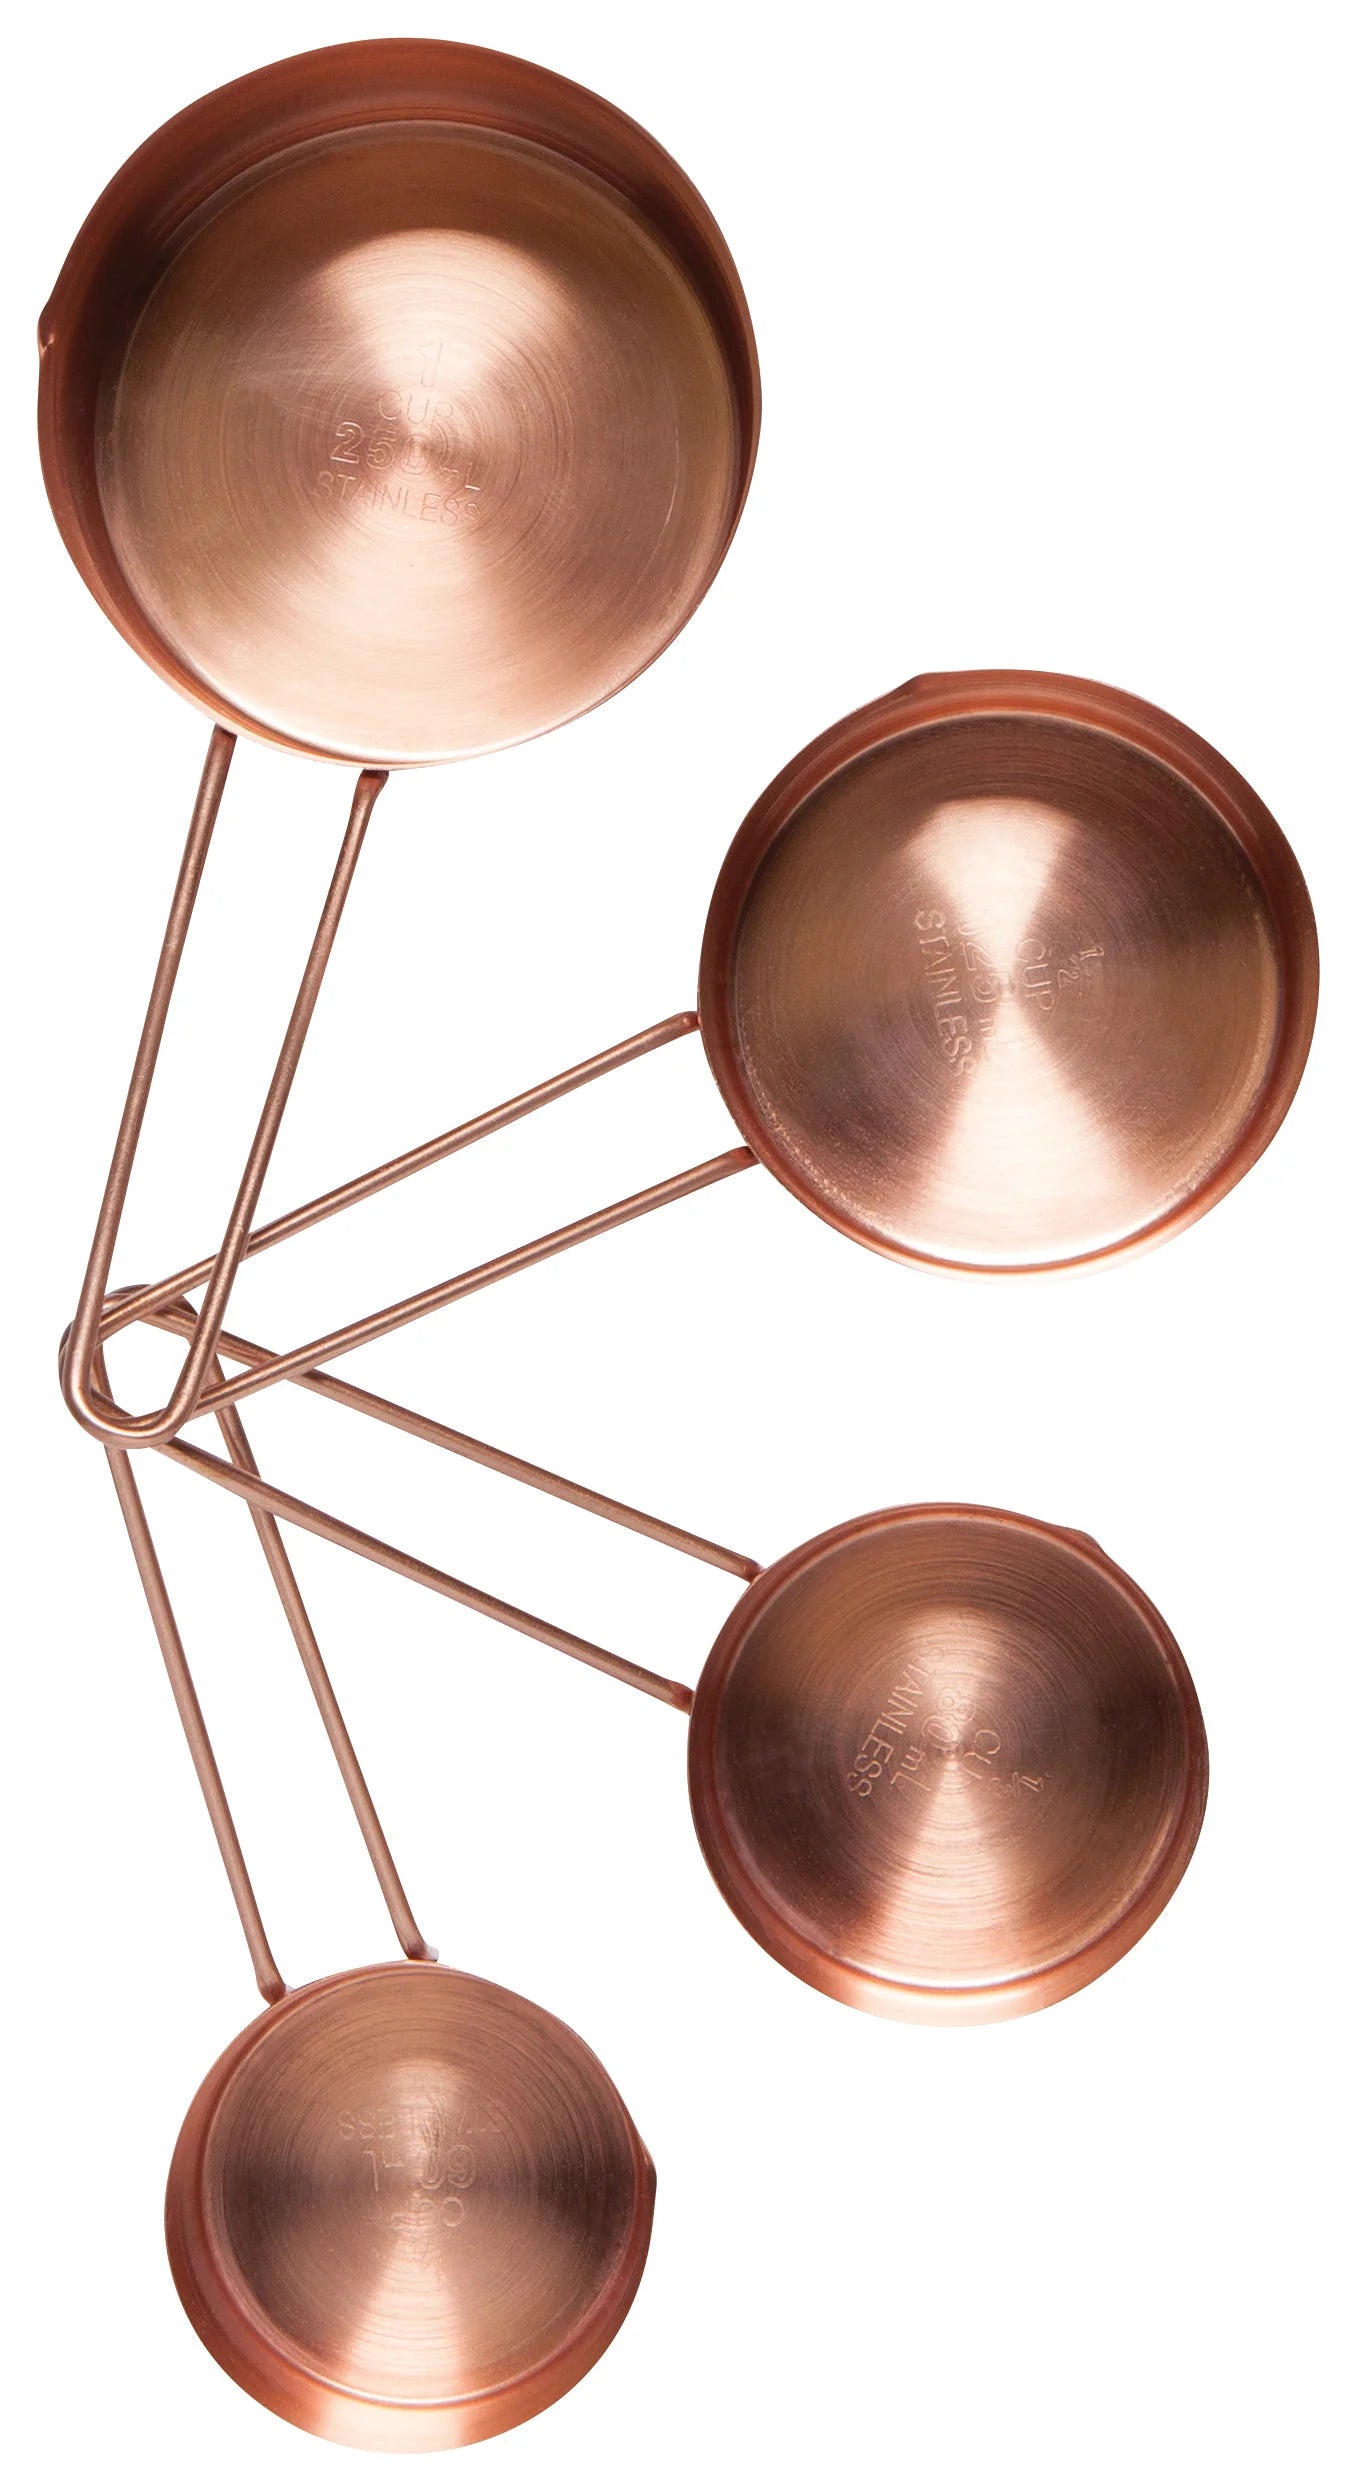 Rose Gold Stainless Steel Measuring Cups (Set of 4)